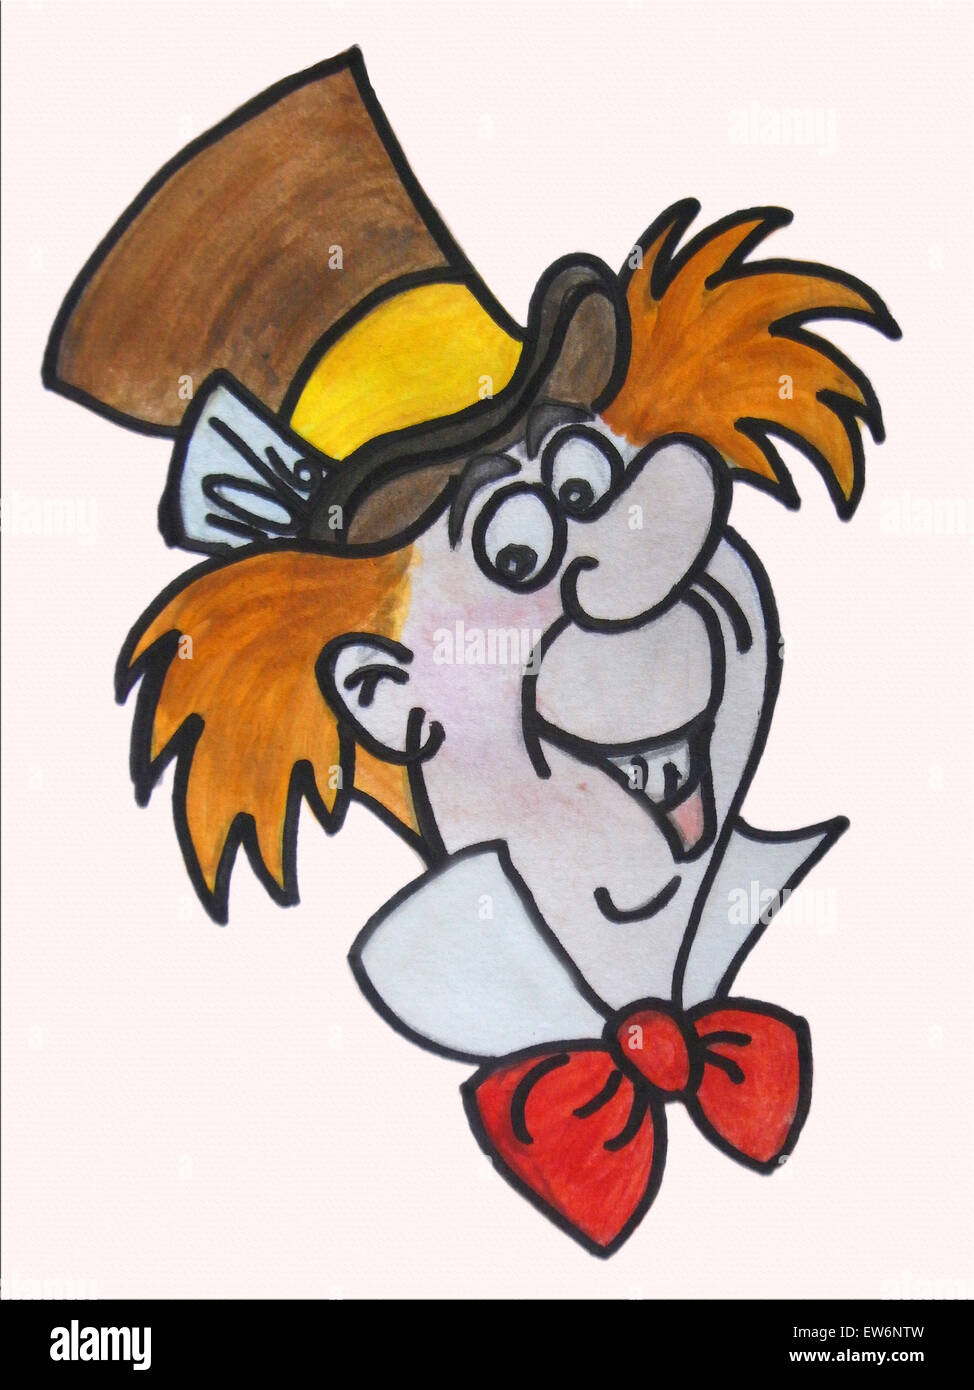 An illustration of the Mad Hatter from the film Alice in Wonderland Stock Photo